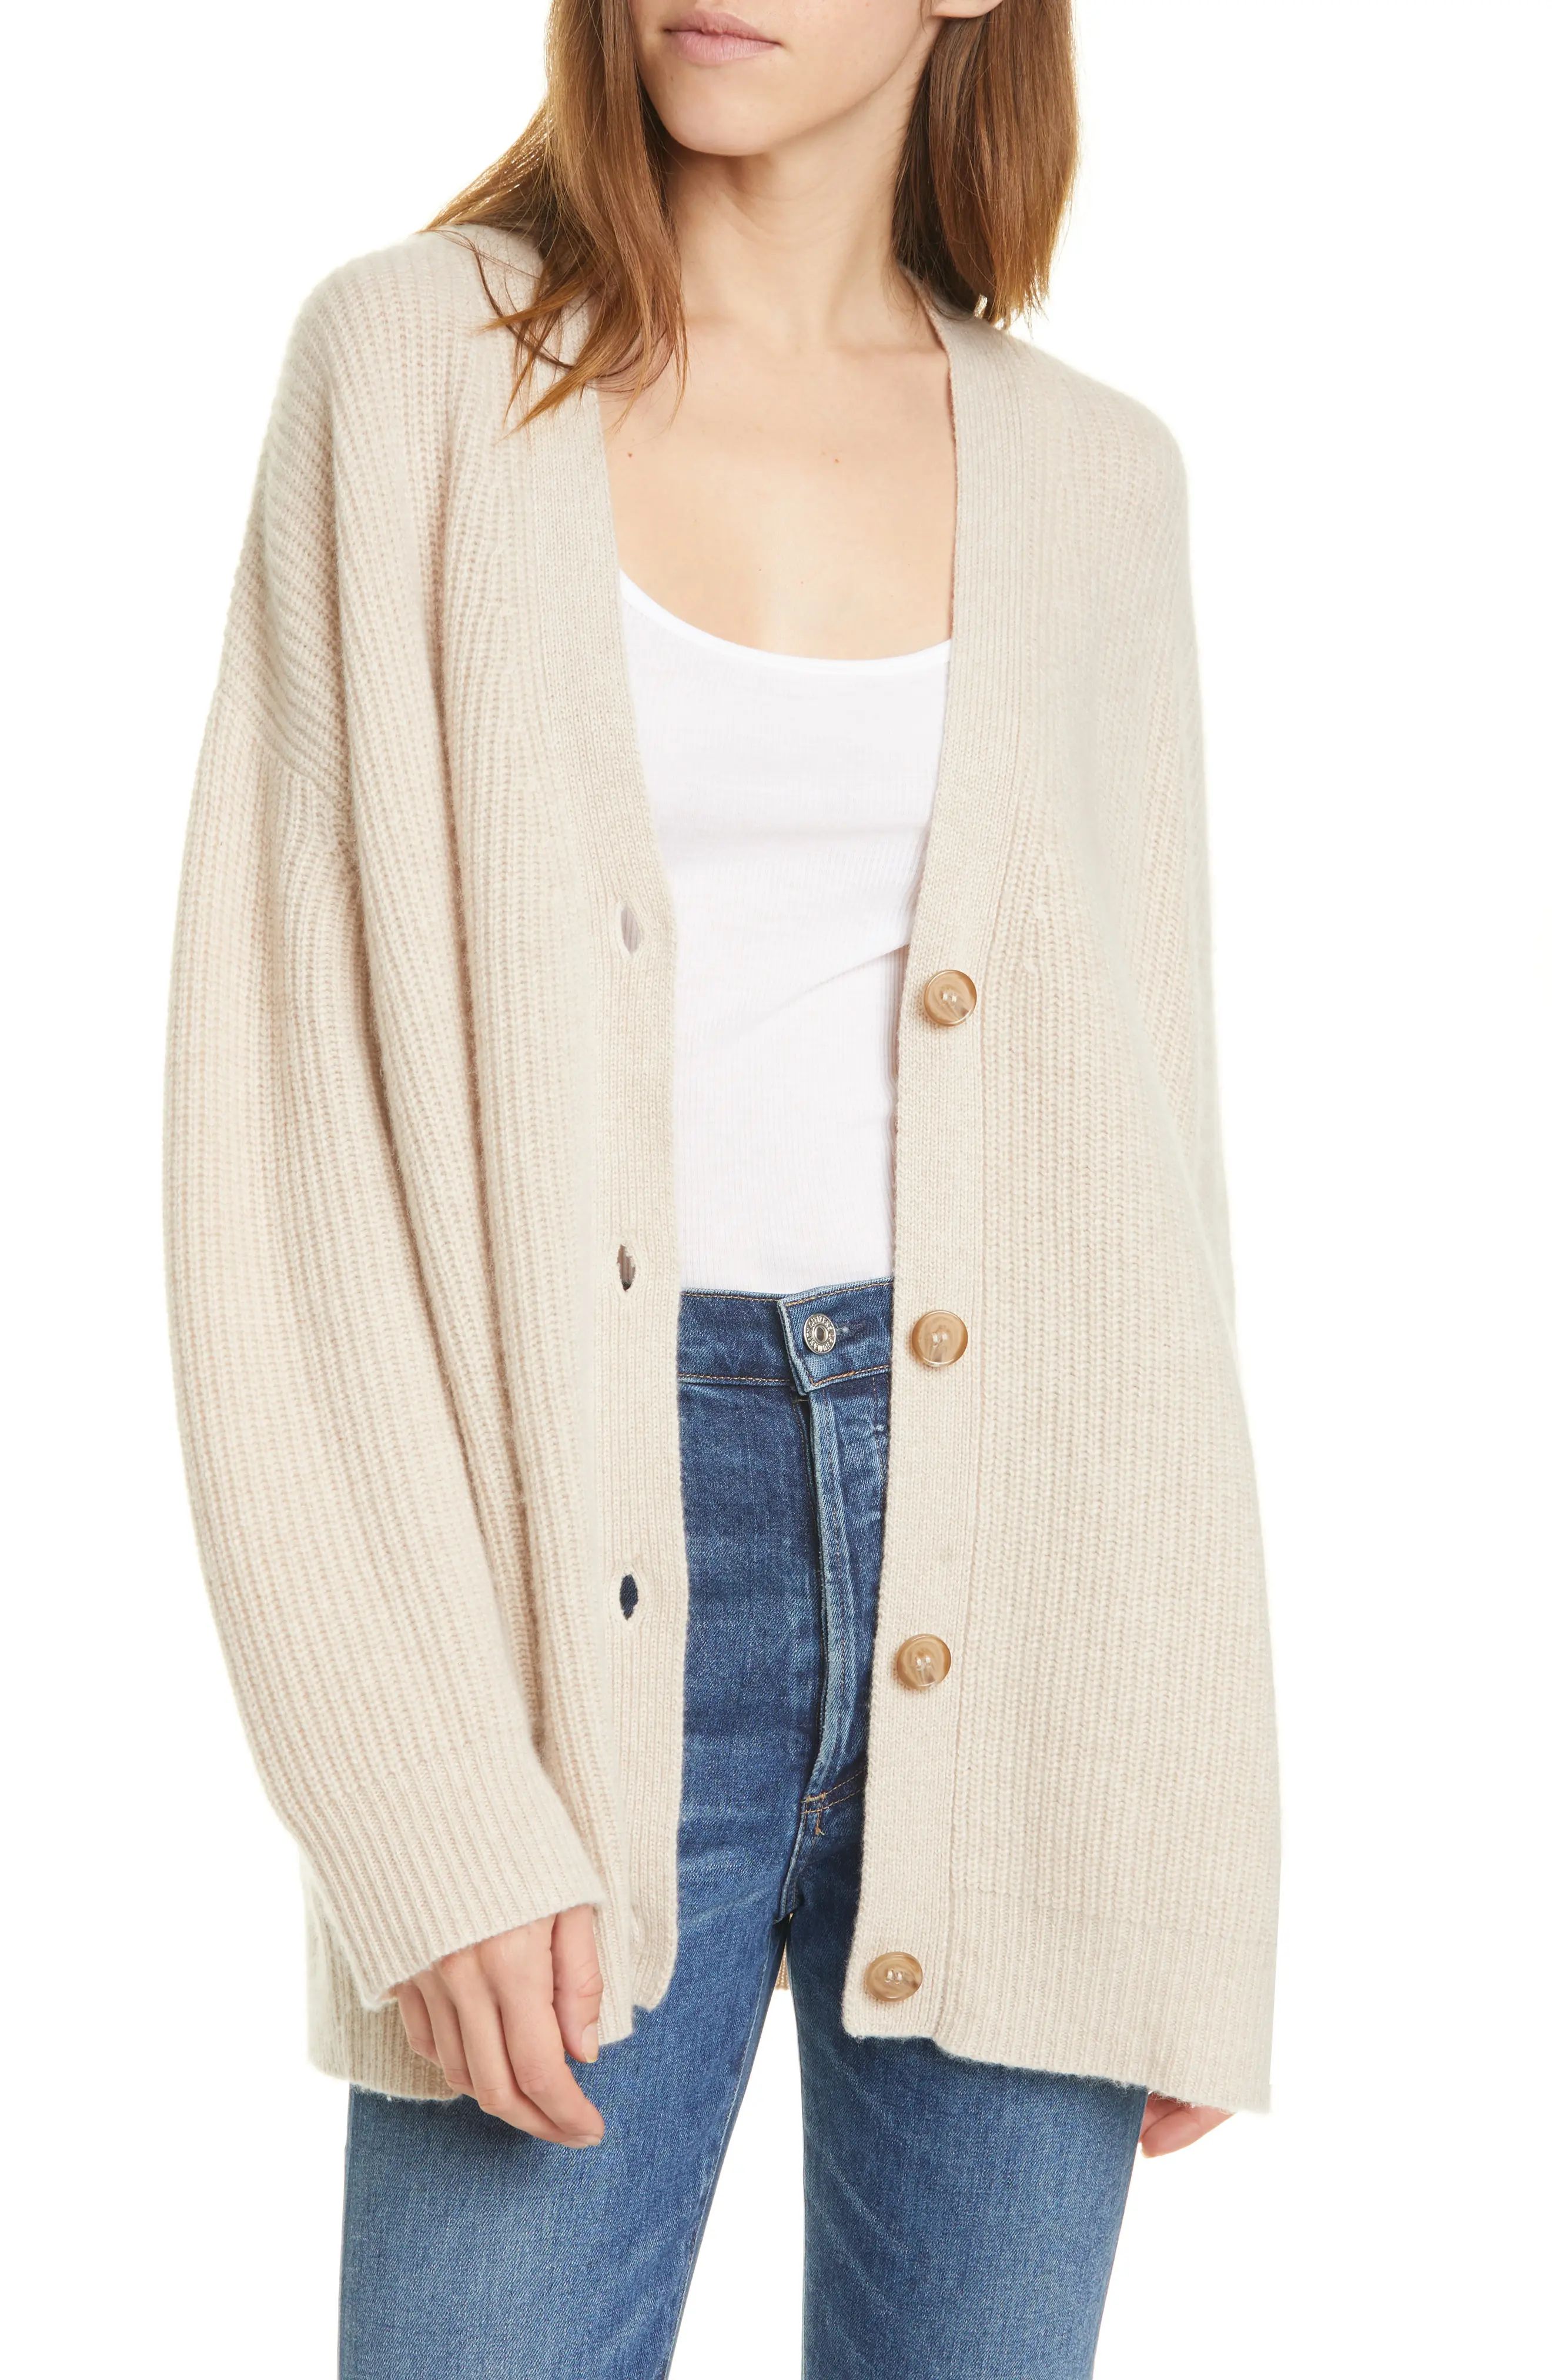 Jenni Kayne Cashmere Cocoon Cardigan in Oatmeal at Nordstrom, Size X-Large | Nordstrom